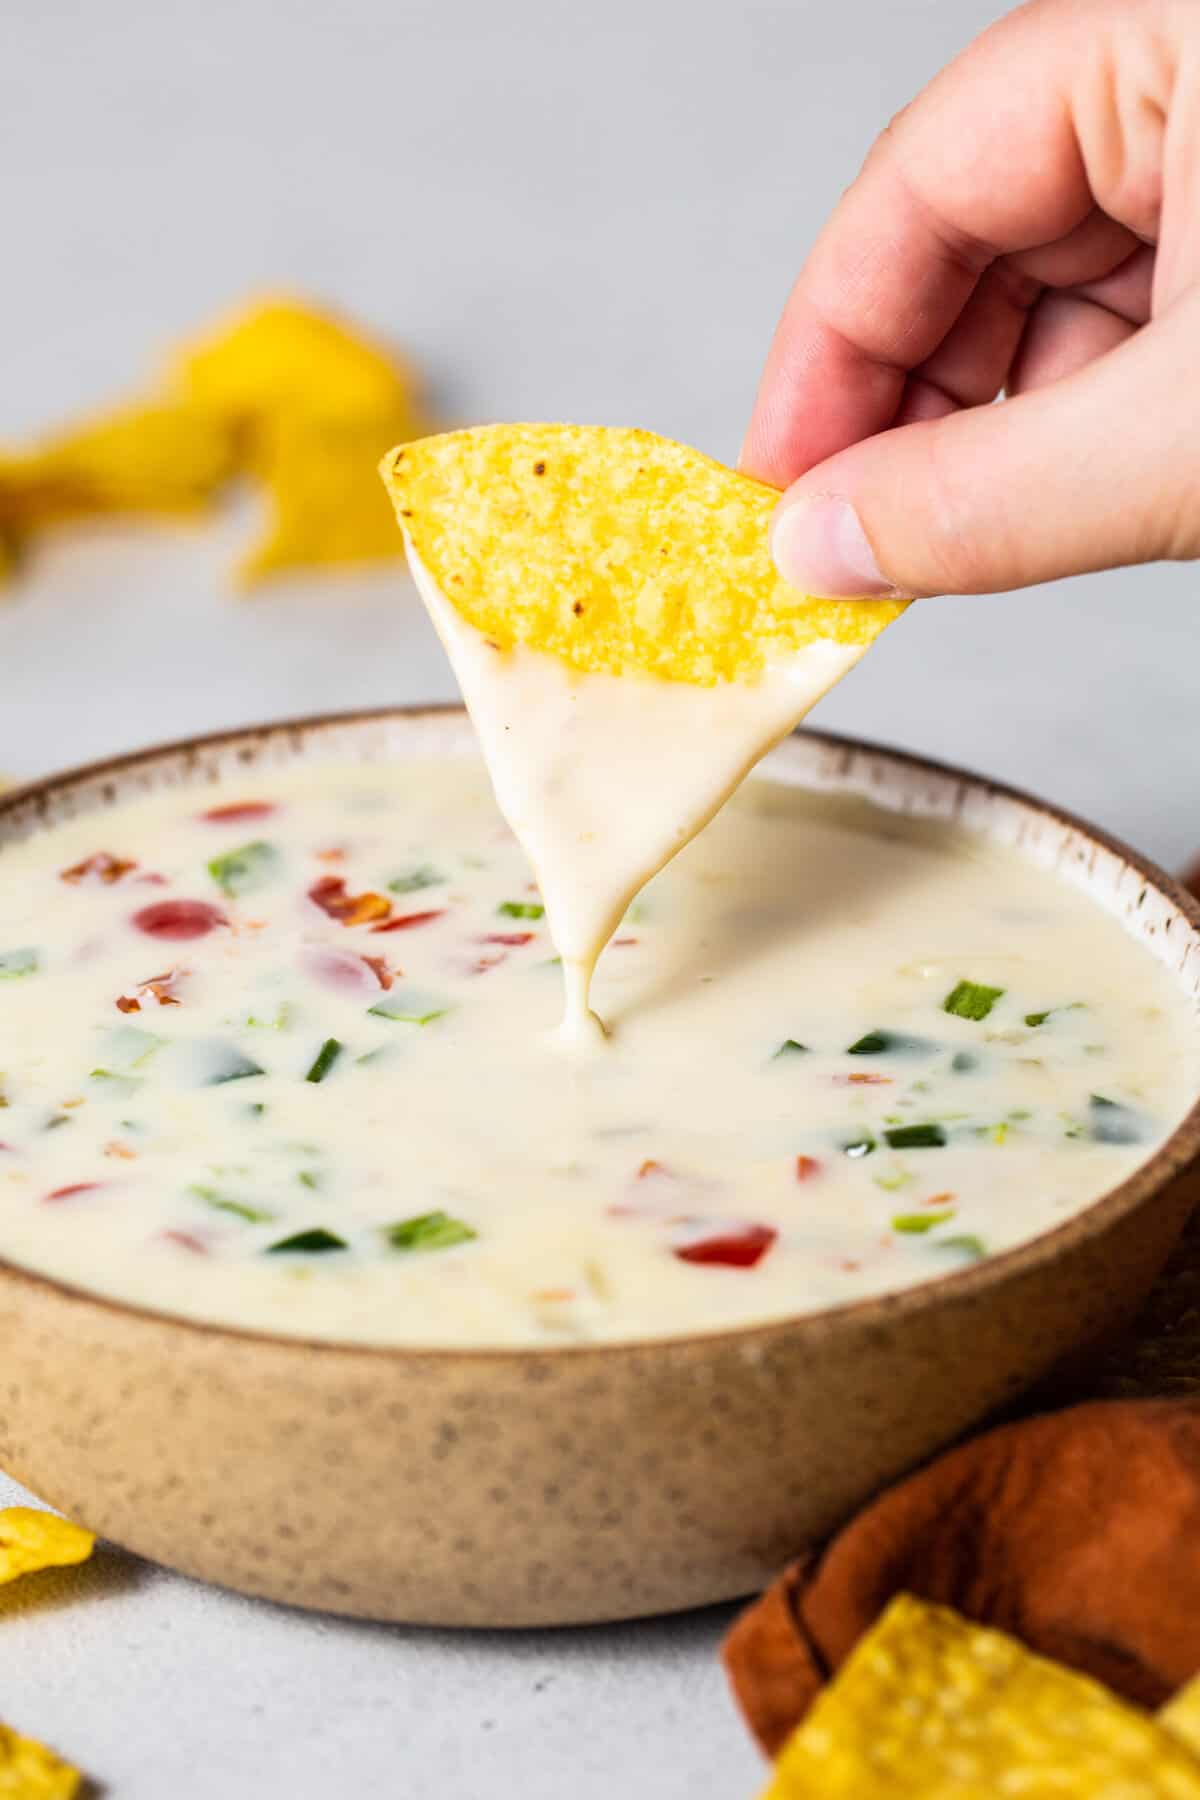 A chip being dipped into a bowl of queso blanco dip.